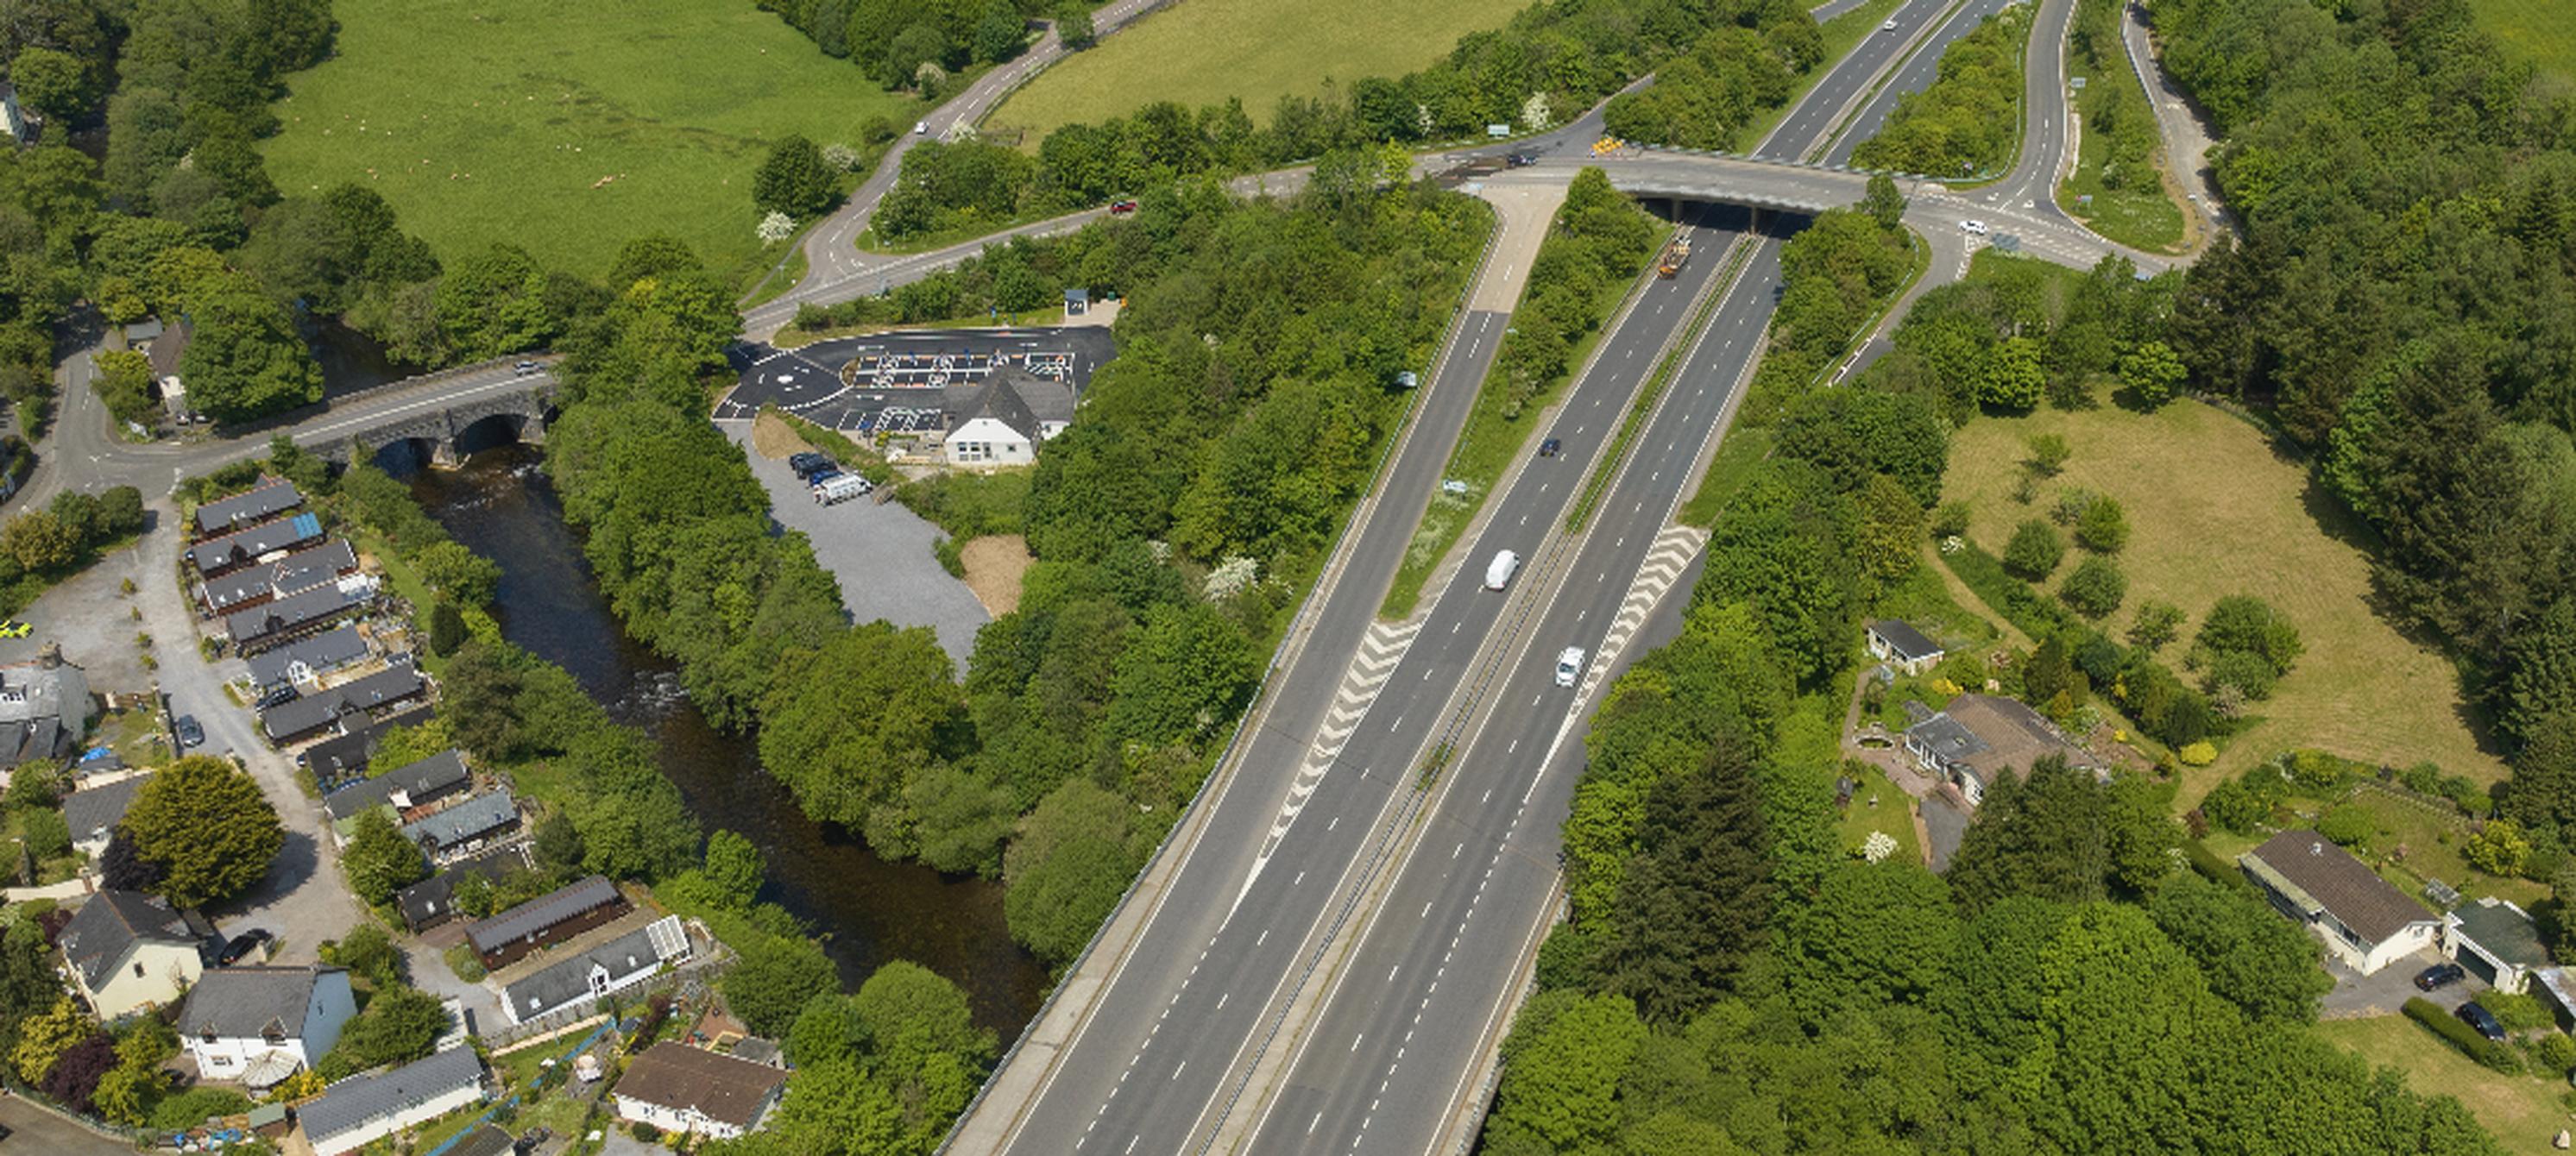 Salmon`s Leap is accessible from both the Plymouth-bound and Exeter-bound carriageways of the A38